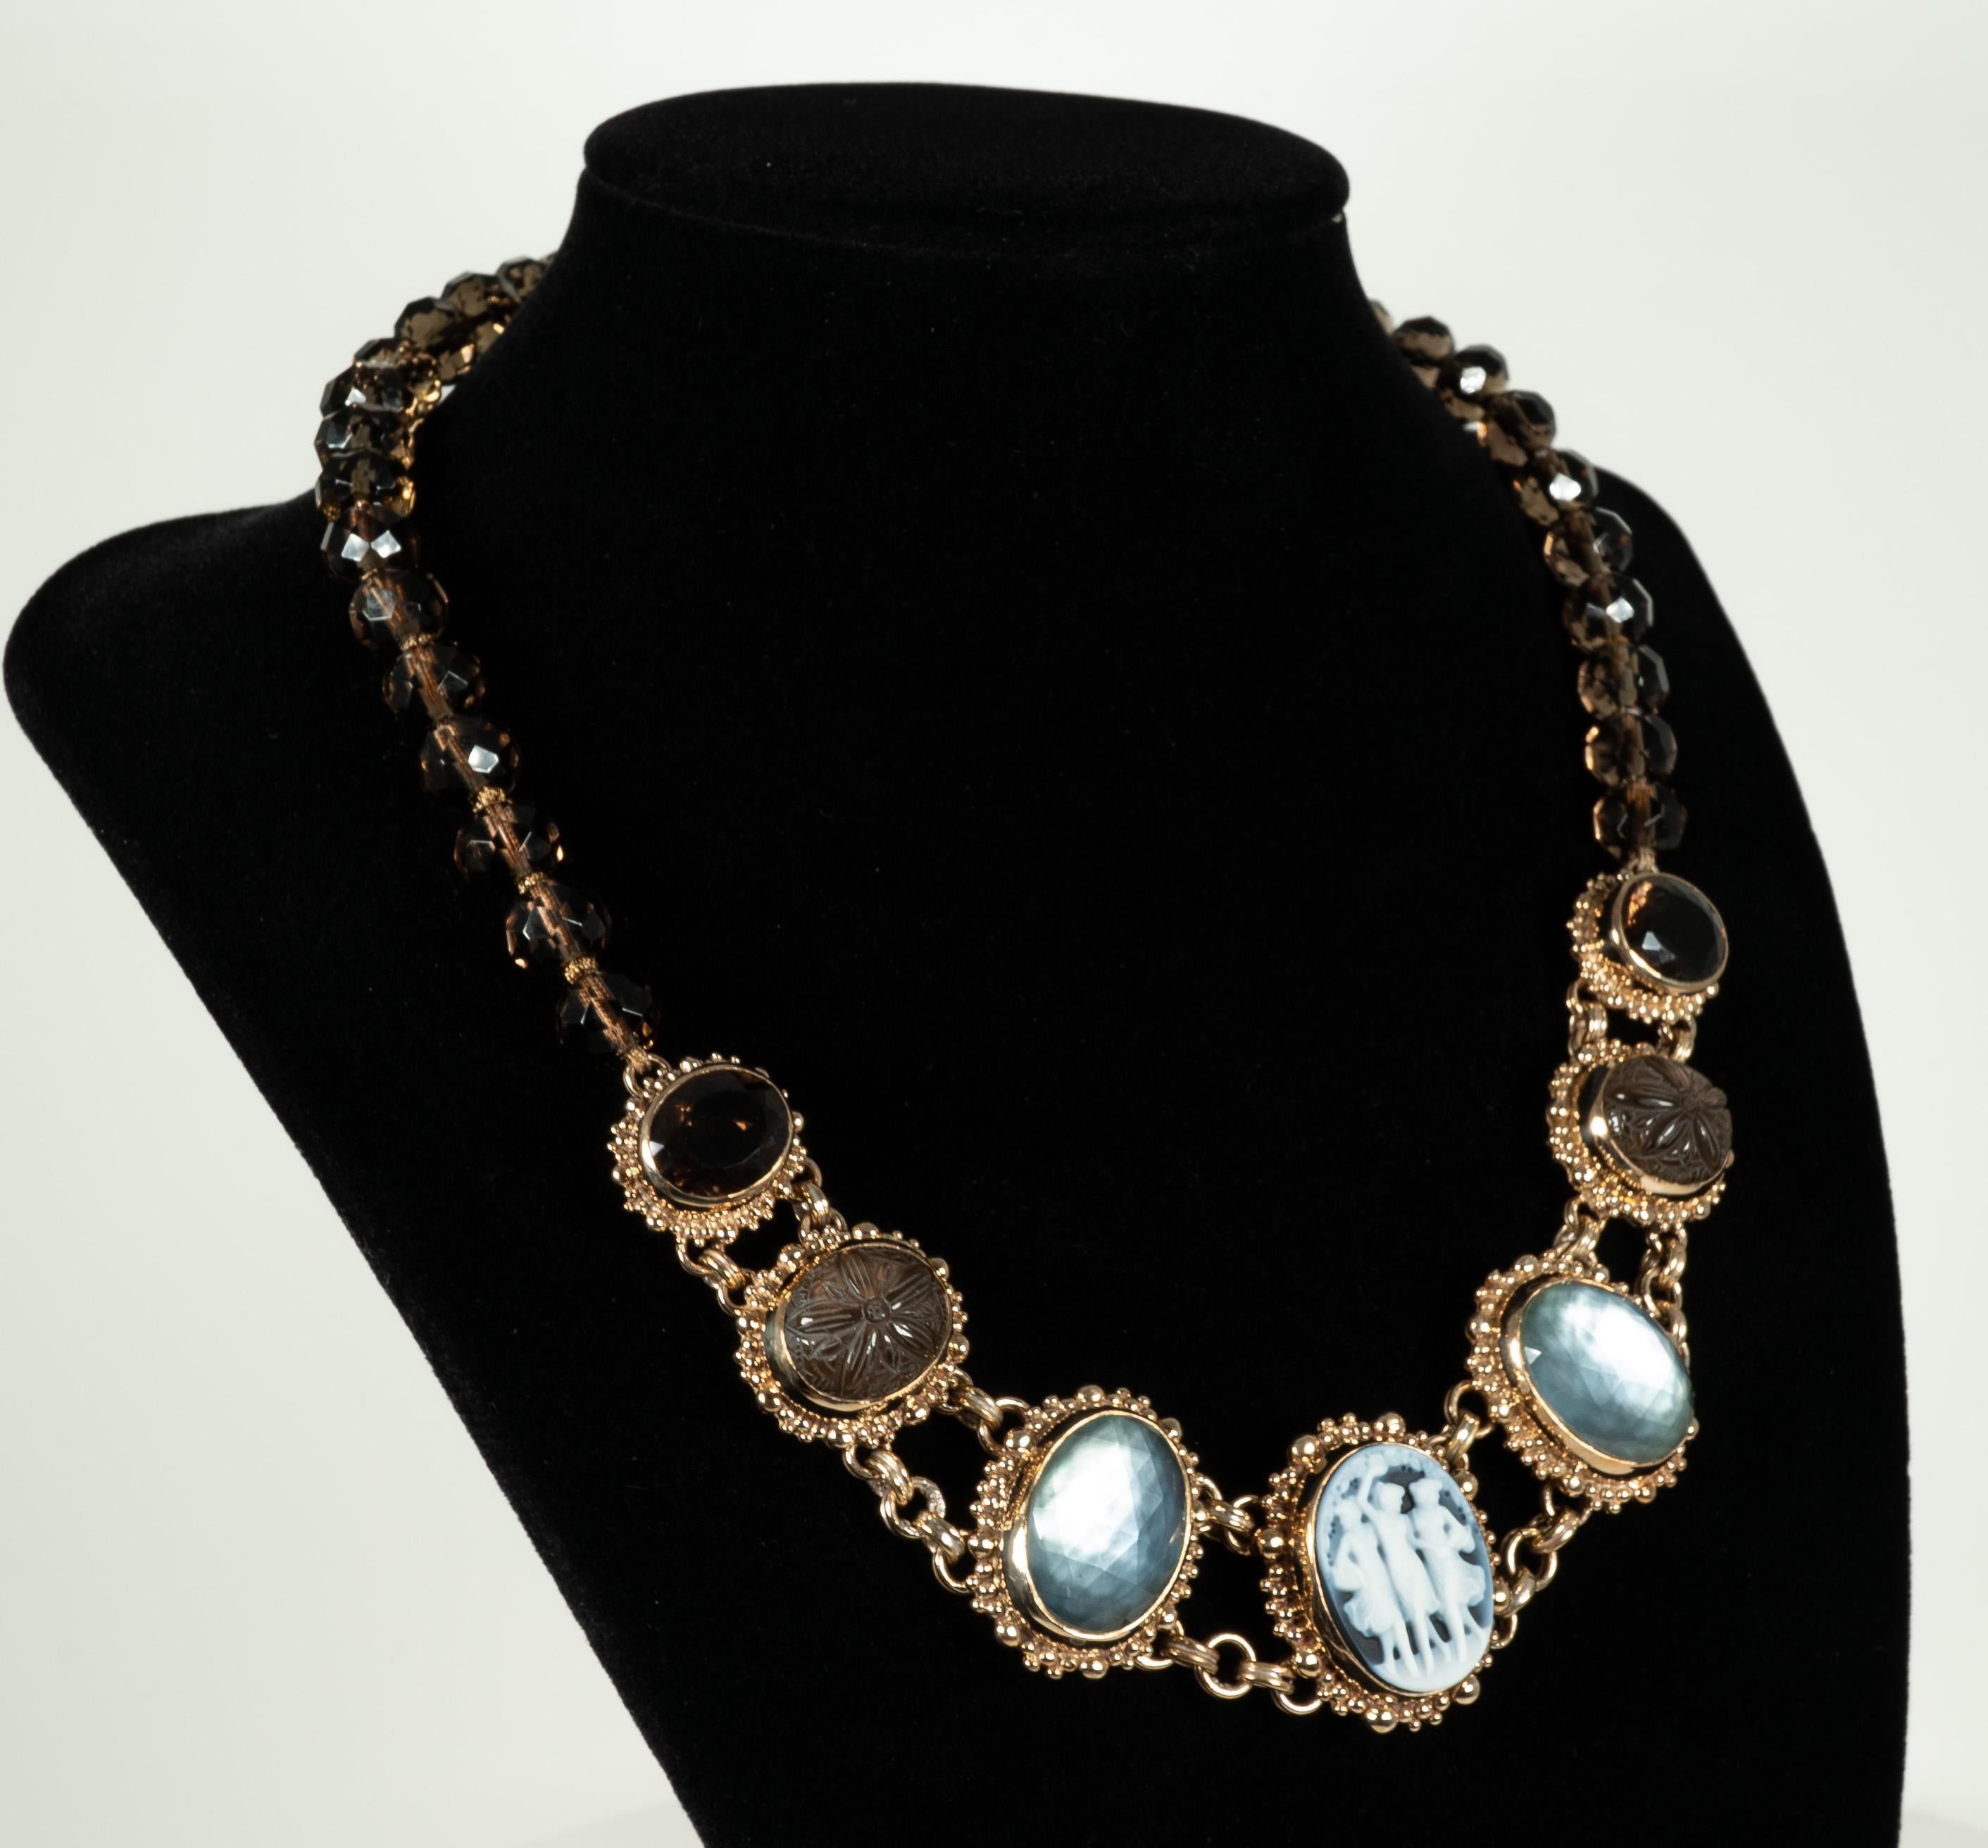 This brass, quartz, cameo necklace is such a fun look by jewelry designer Stephen Dweck!